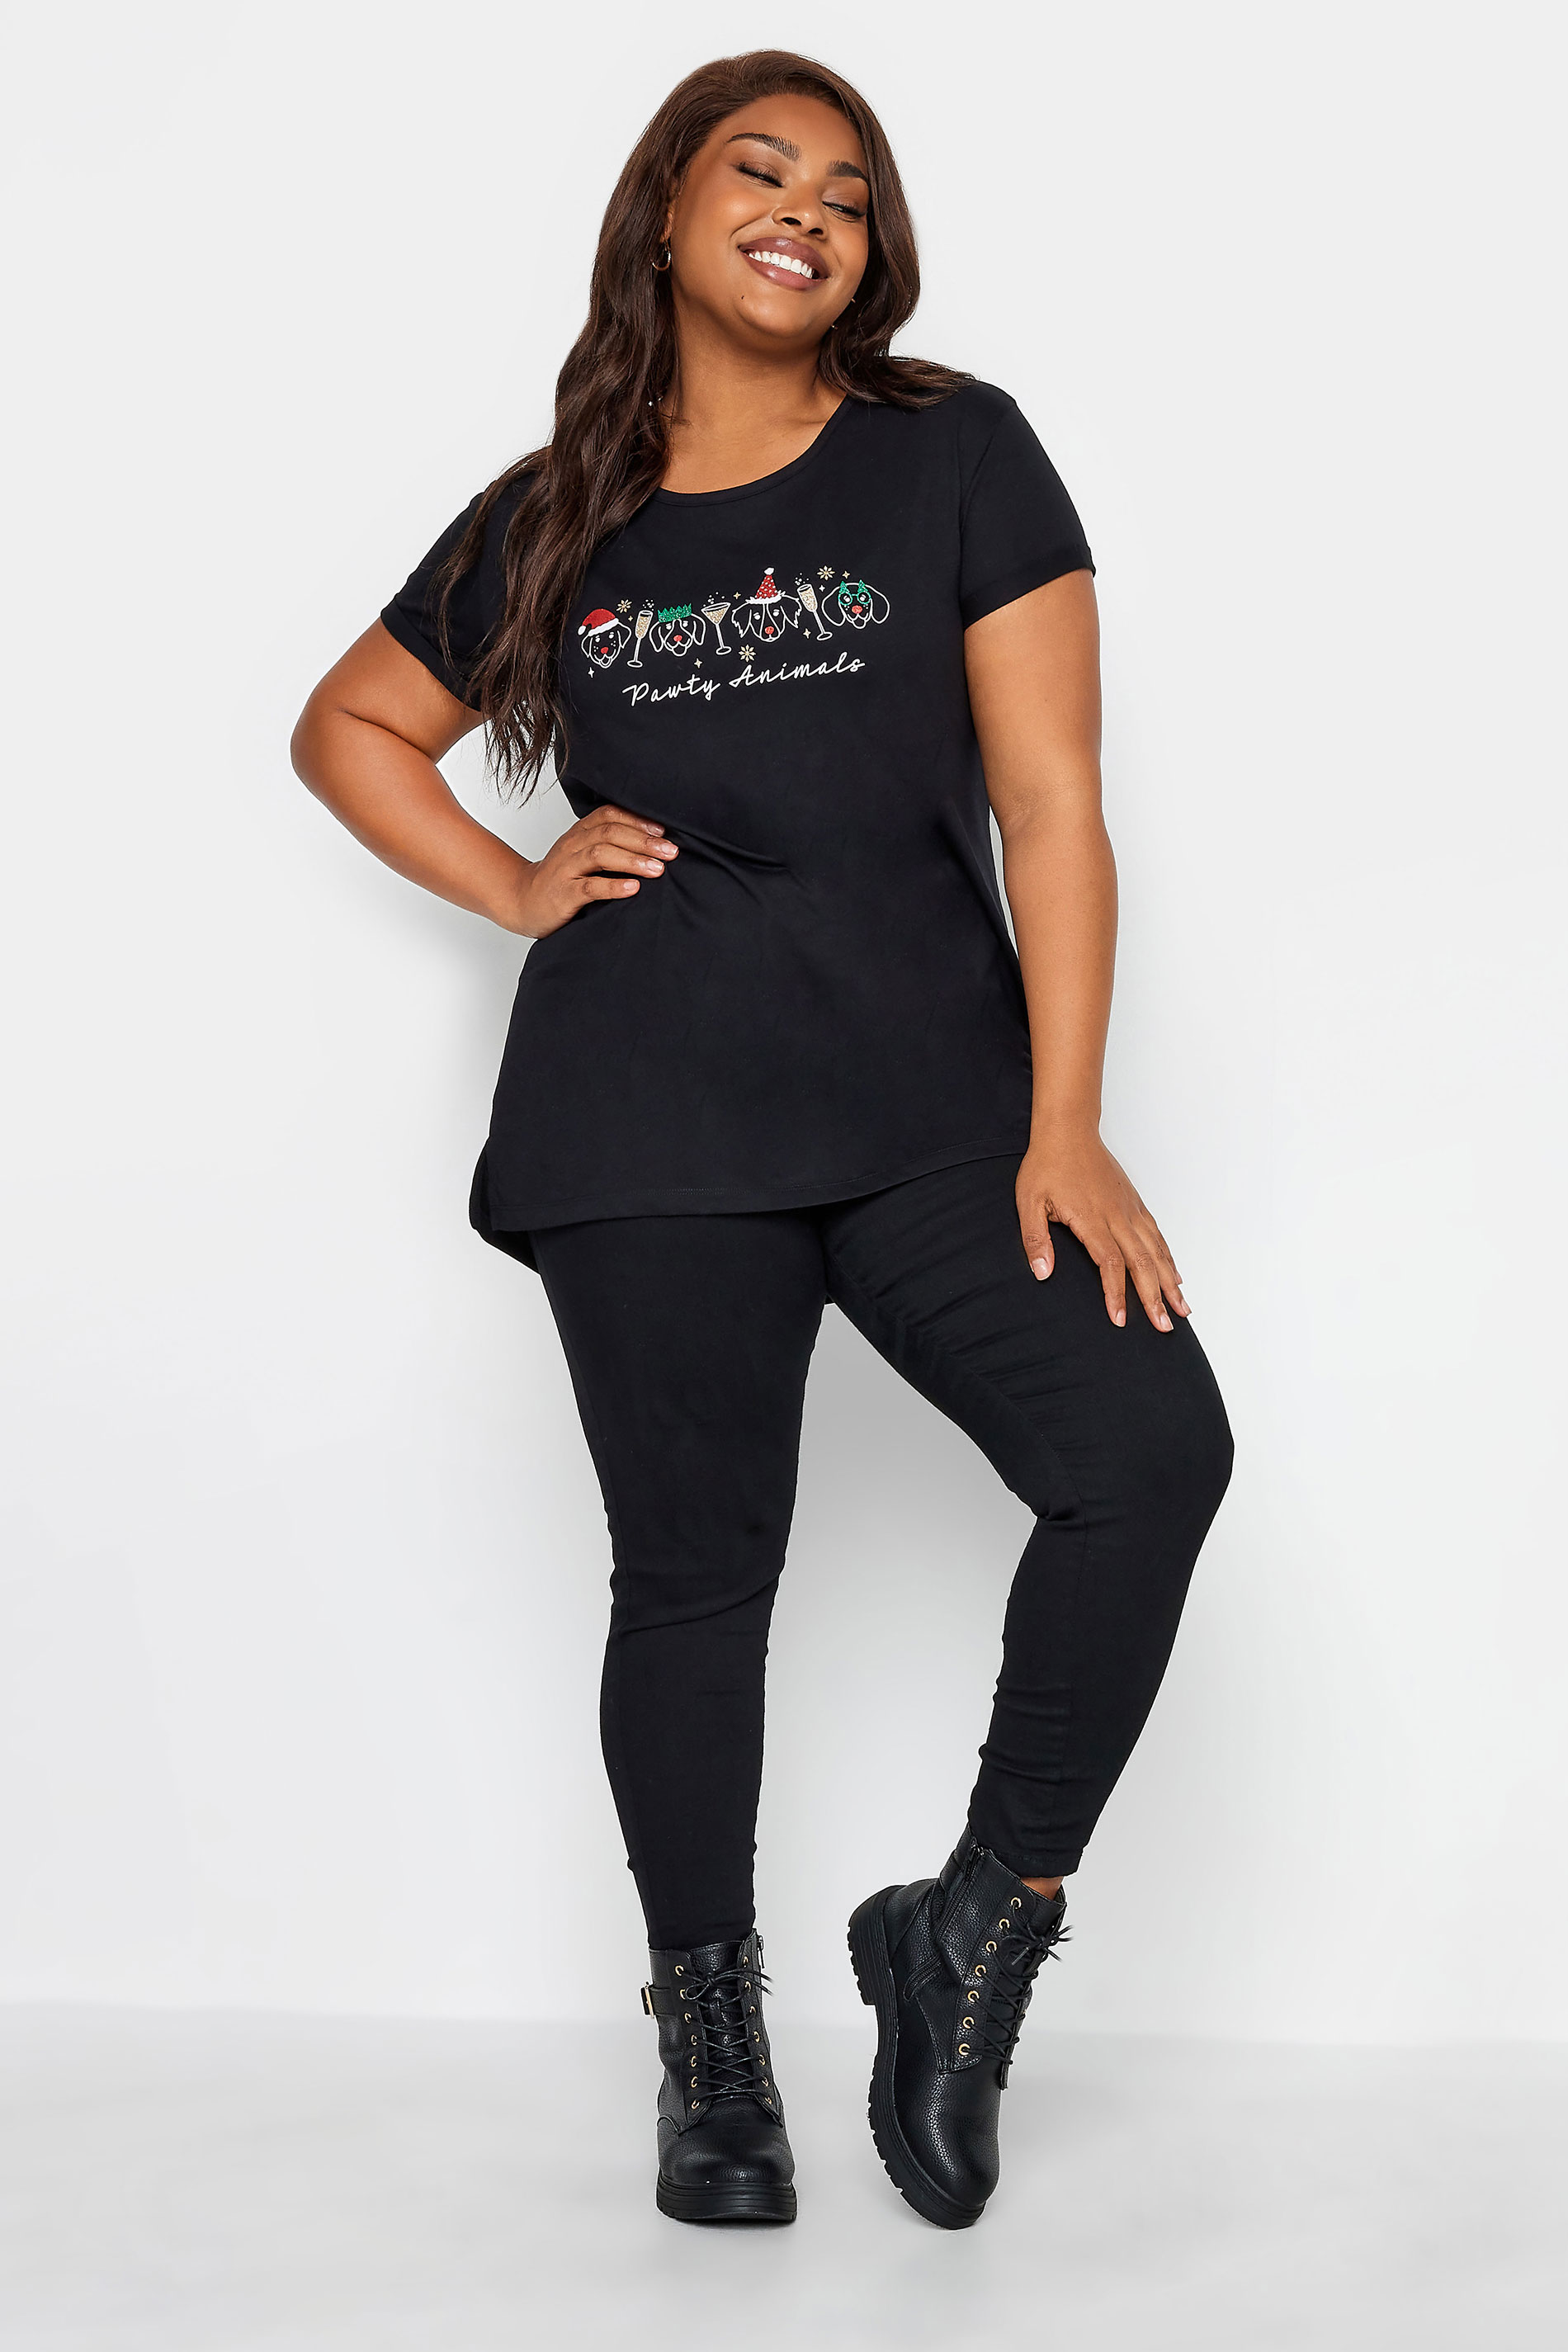 YOURS Plus Size Black 'Party Animals' Novelty Christmas T-Shirt | Yours Clothing 2